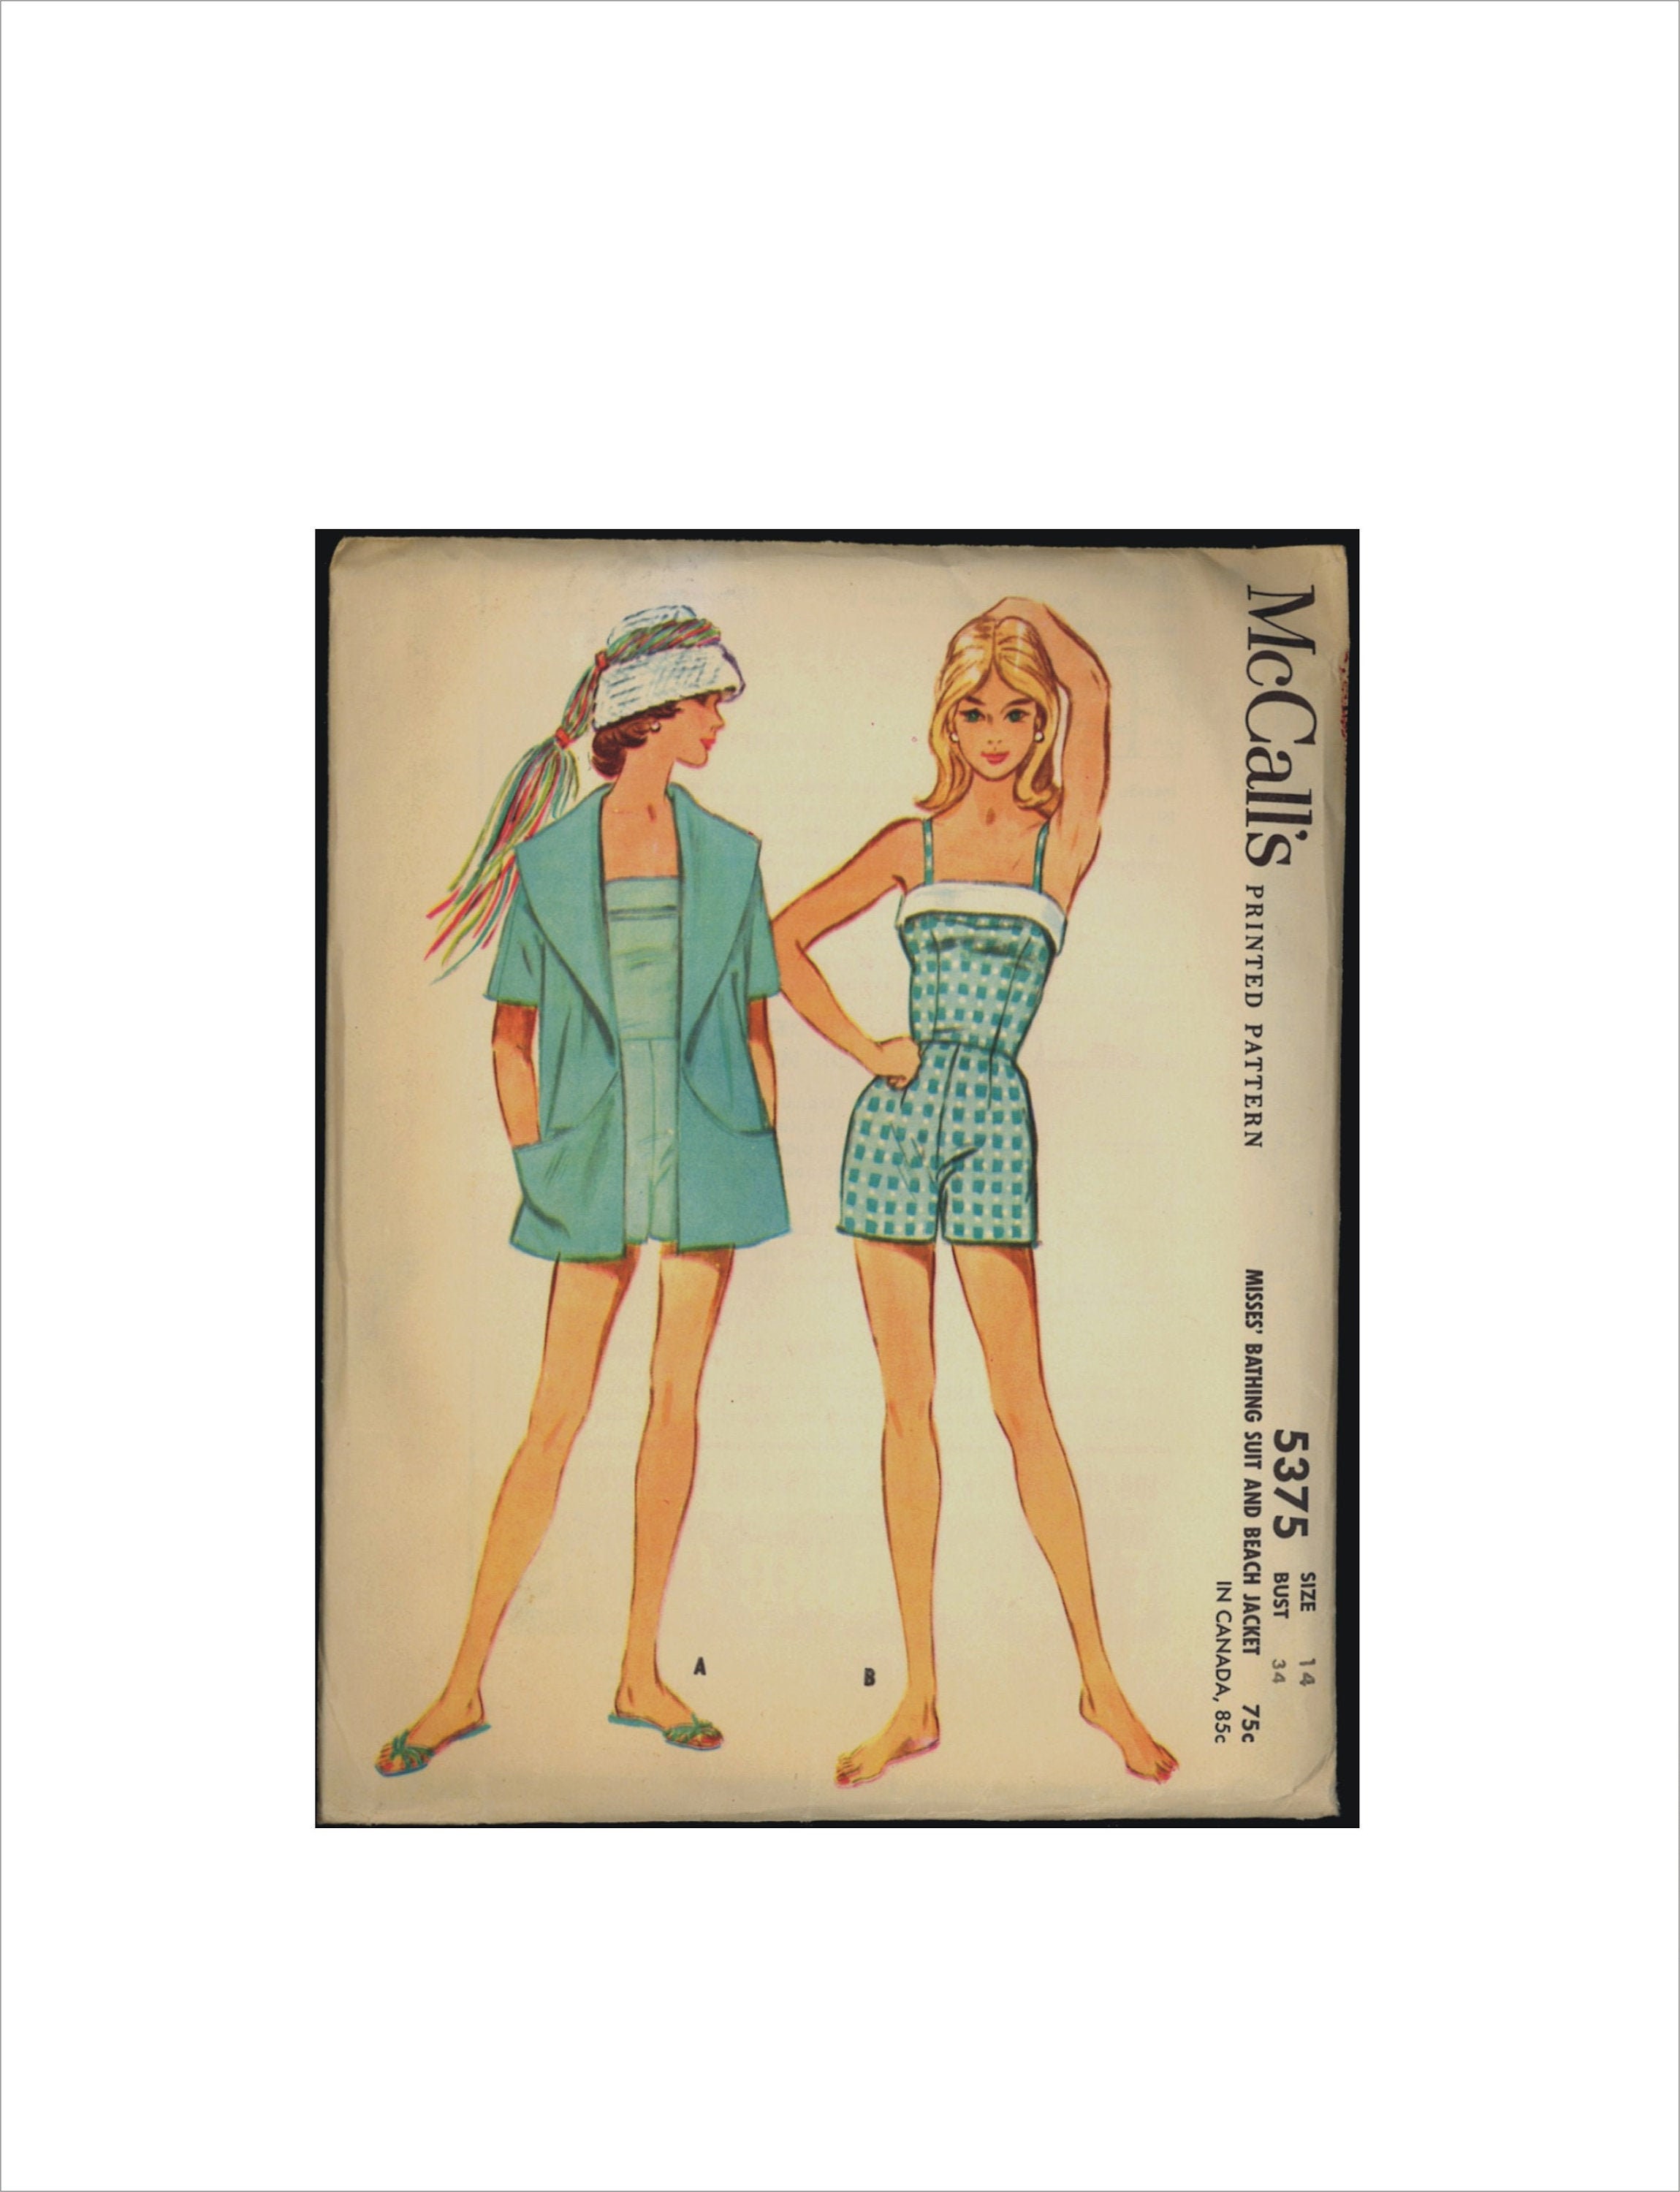 1957 Vintage Sewing Pattern B32 SWIMSUIT BATHING SUIT (1820) McCall's 4054  - The Vintage Pattern Shop